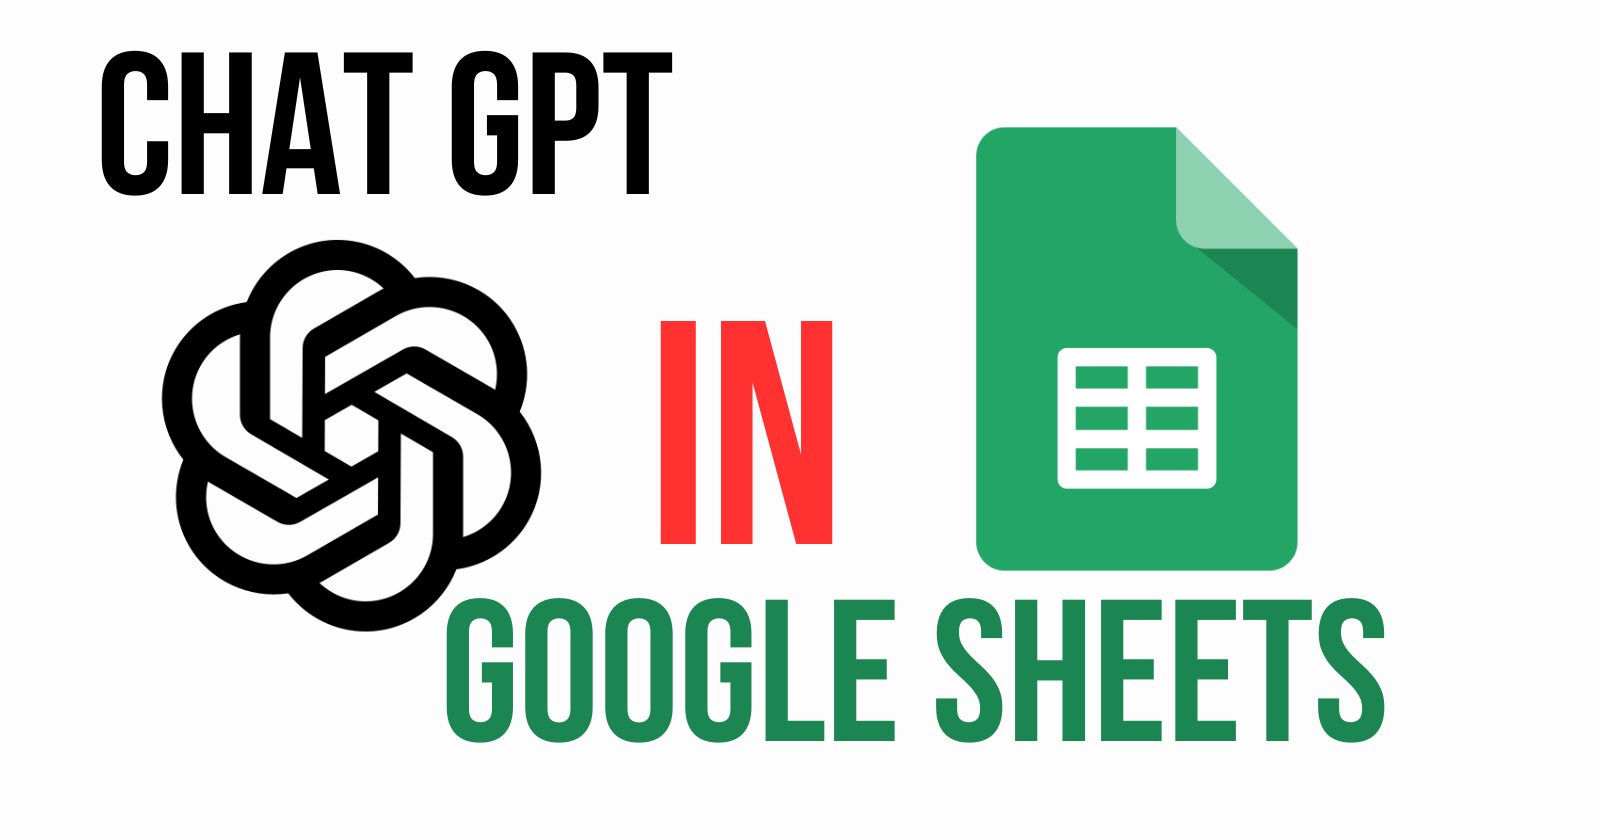 How to Integrate ChatGPT with Google Sheets Using Google Apps Script